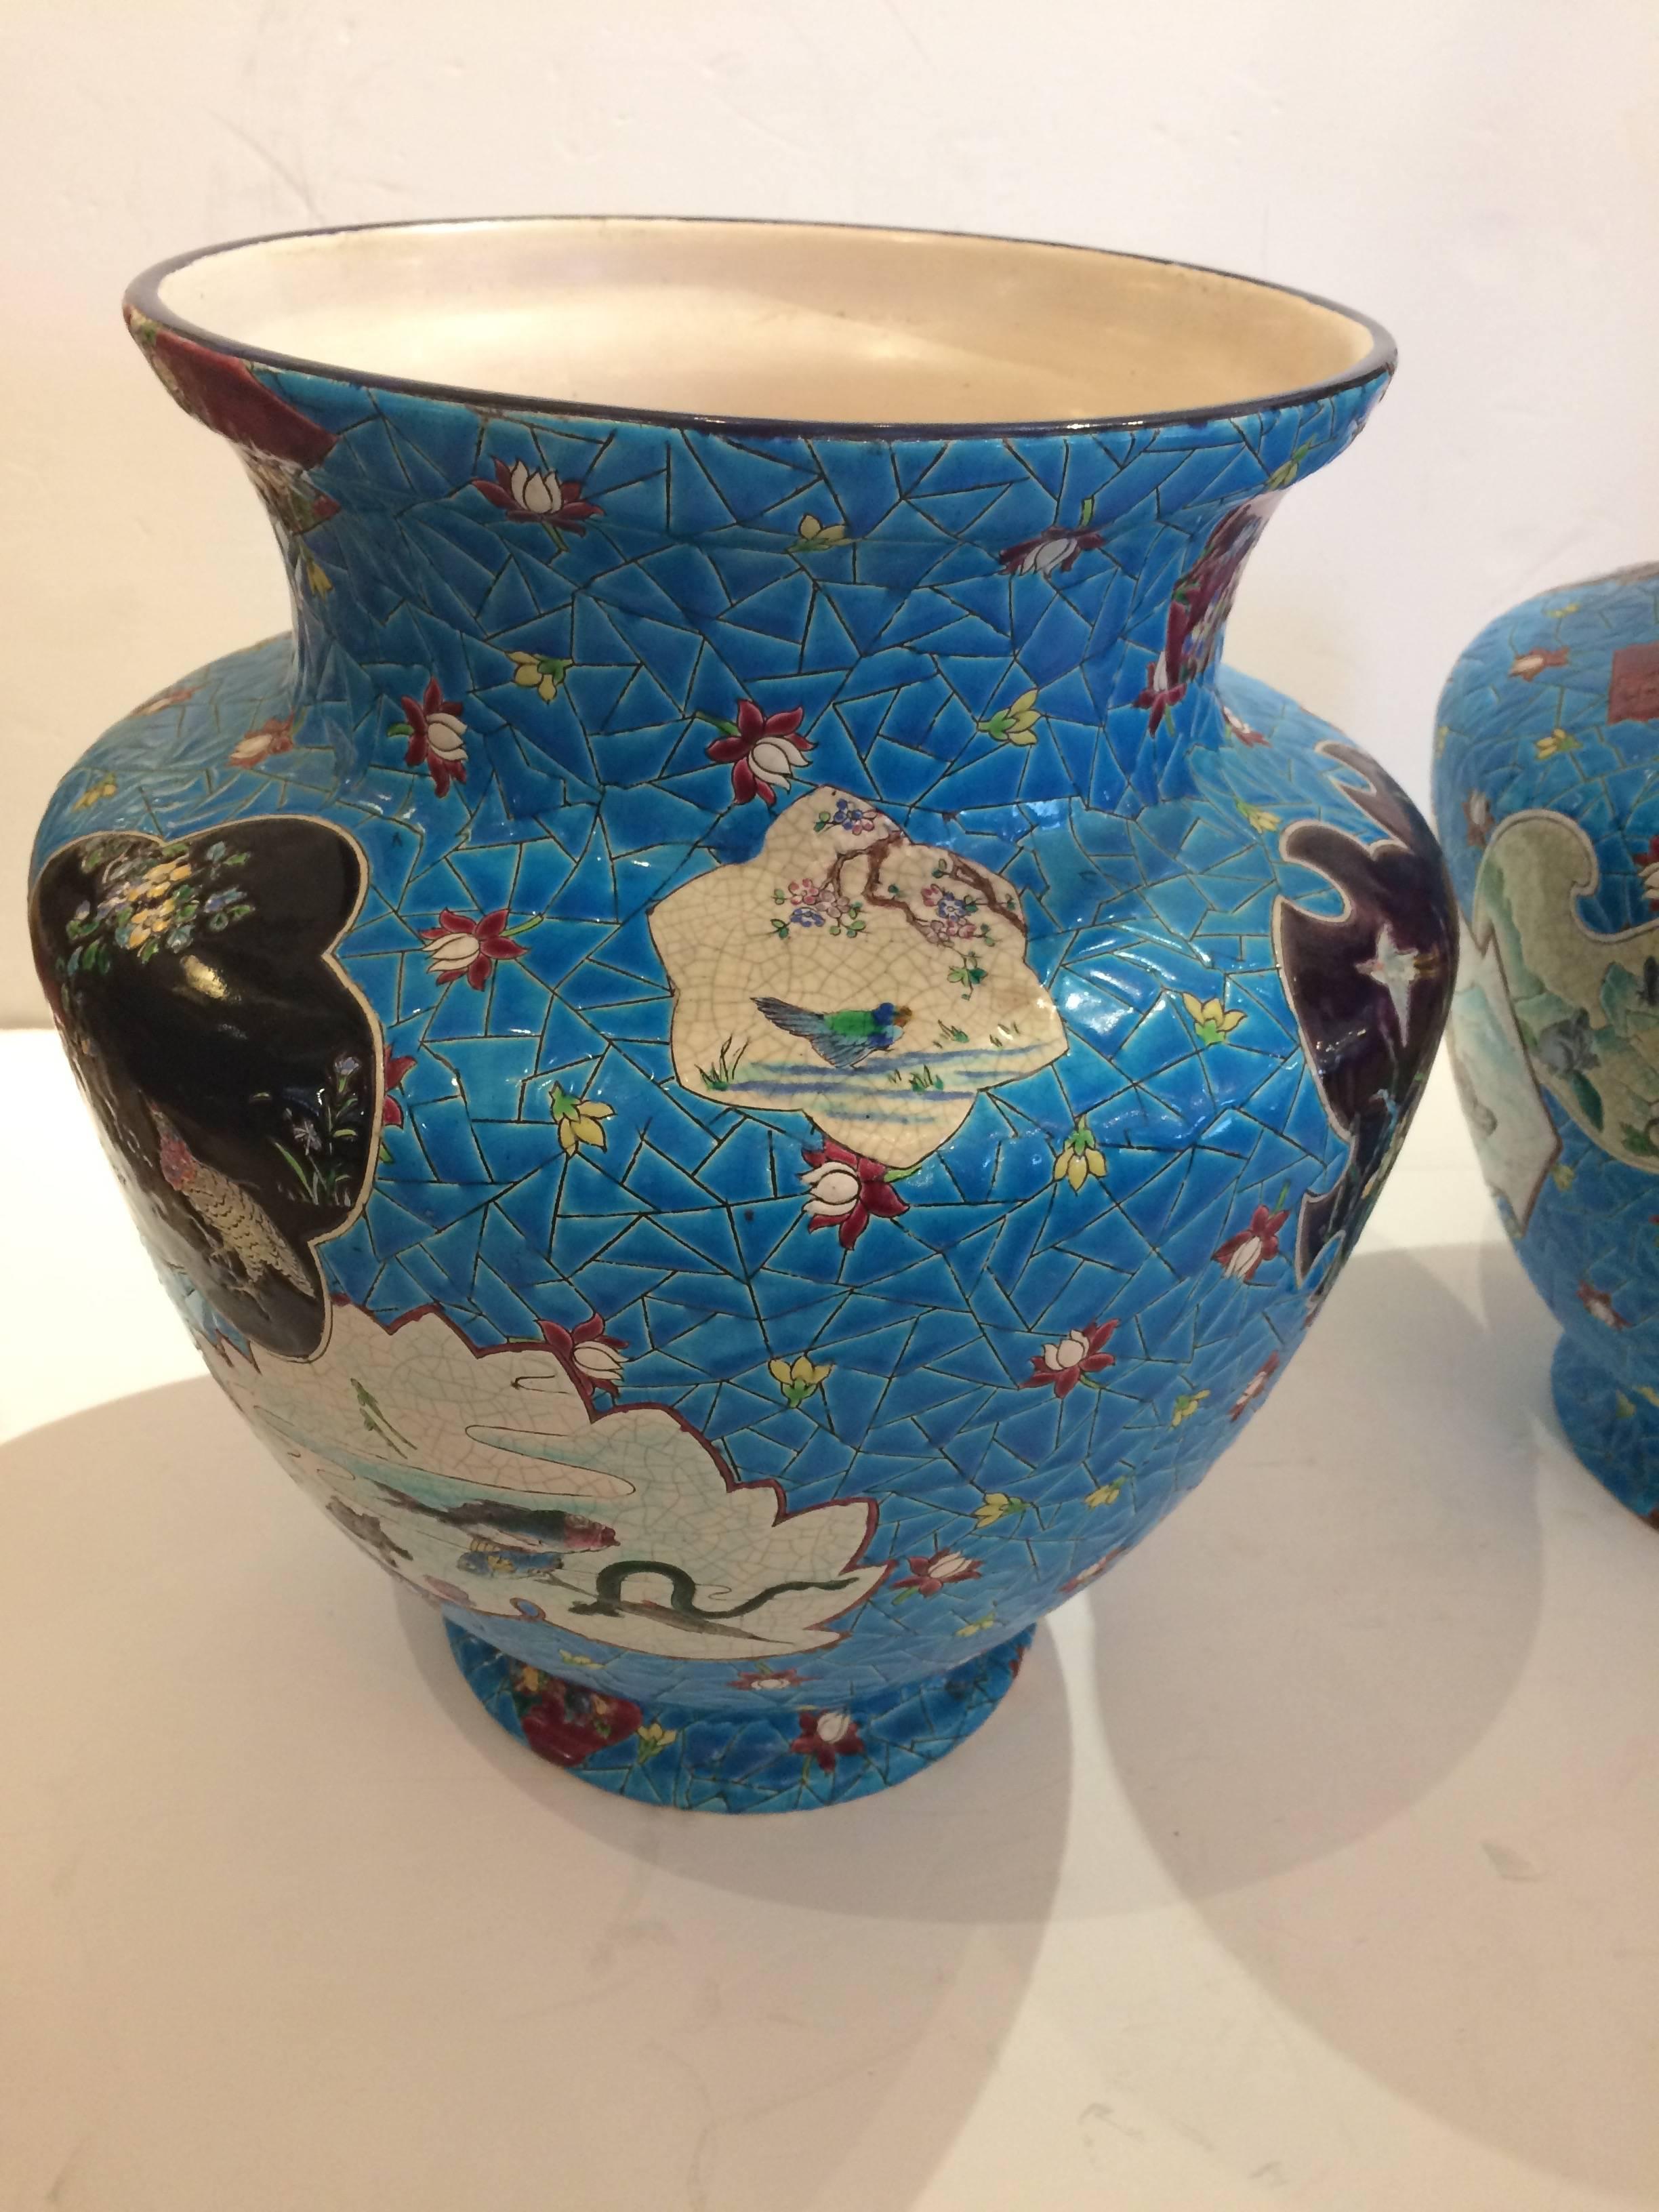 An impressive pair of very large French Longwy vases with meticulous detail having flowers, a figural scene, birds and a rooster in a glistening color palette of bright cerulean blue, black, white and maroon. One is stamped on the bottom. Opening is